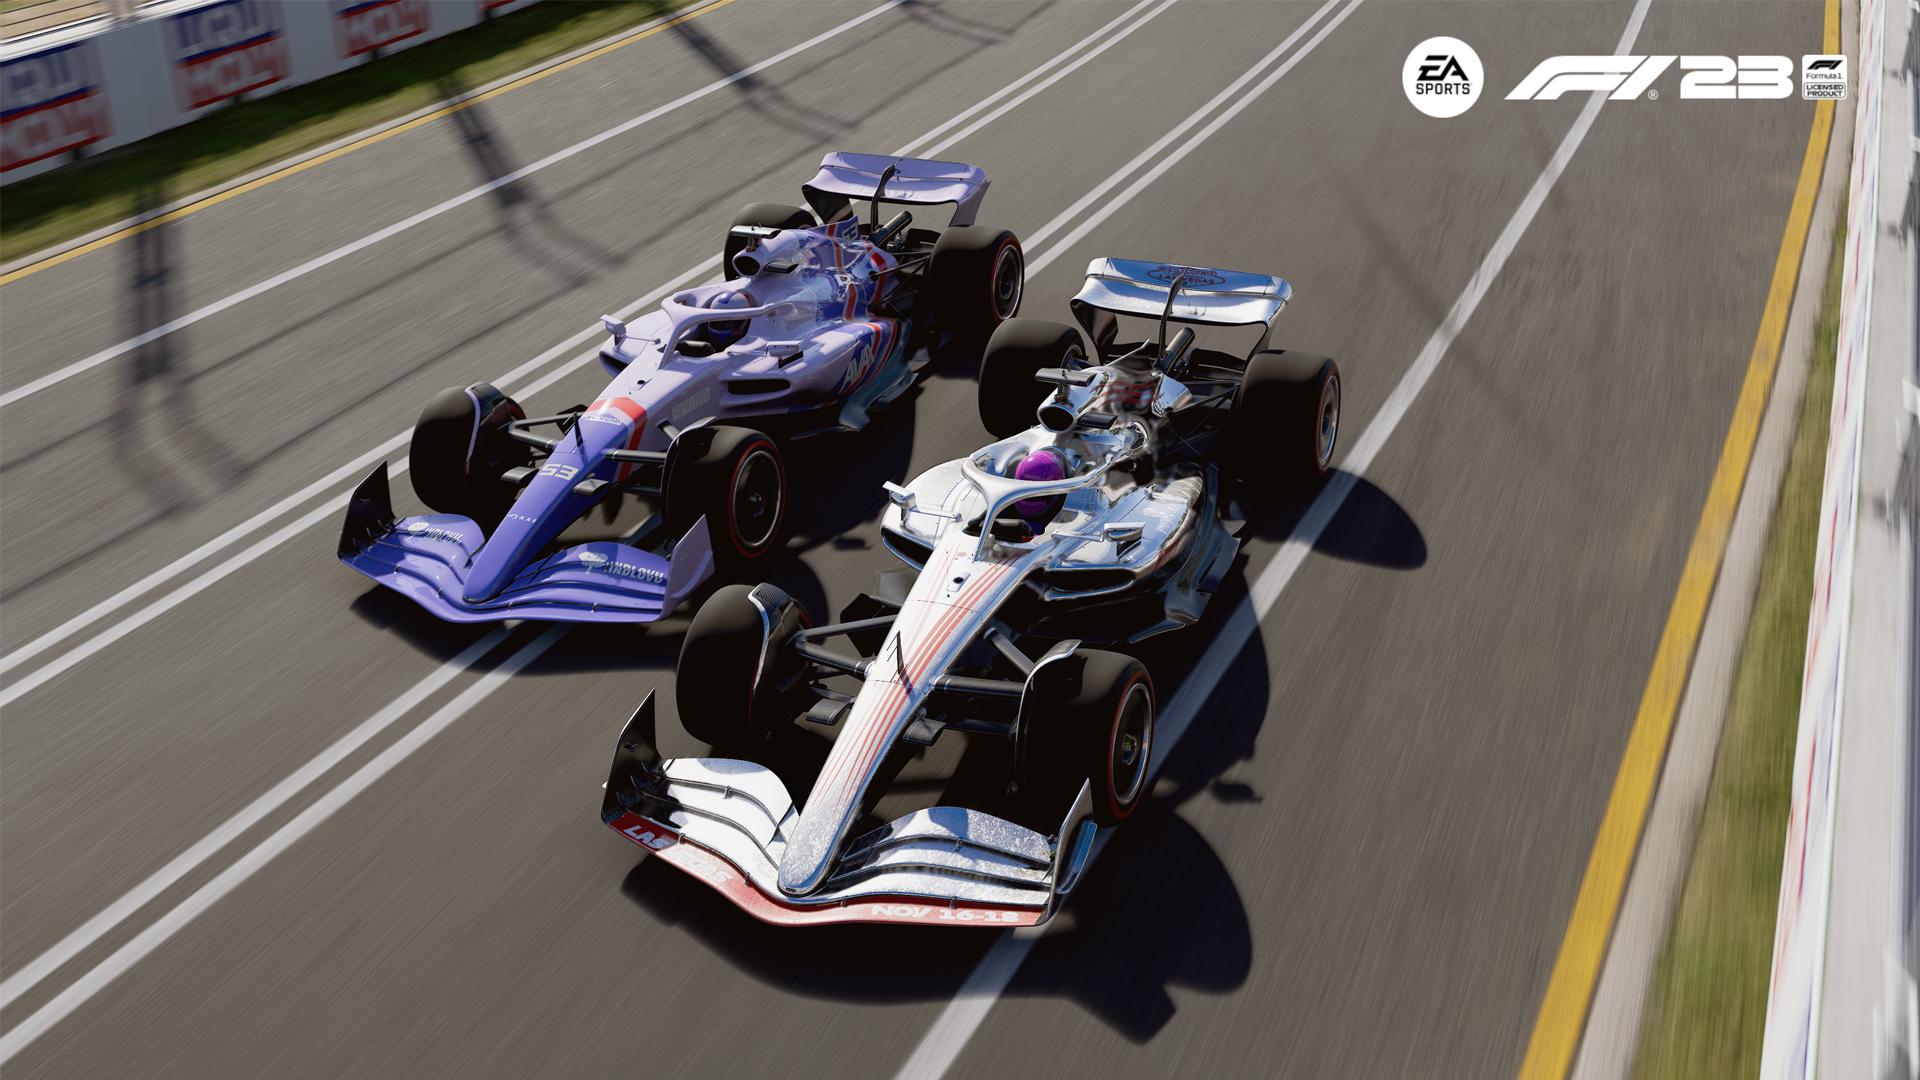 Your guide to F1 23s Podium Pass Traxion